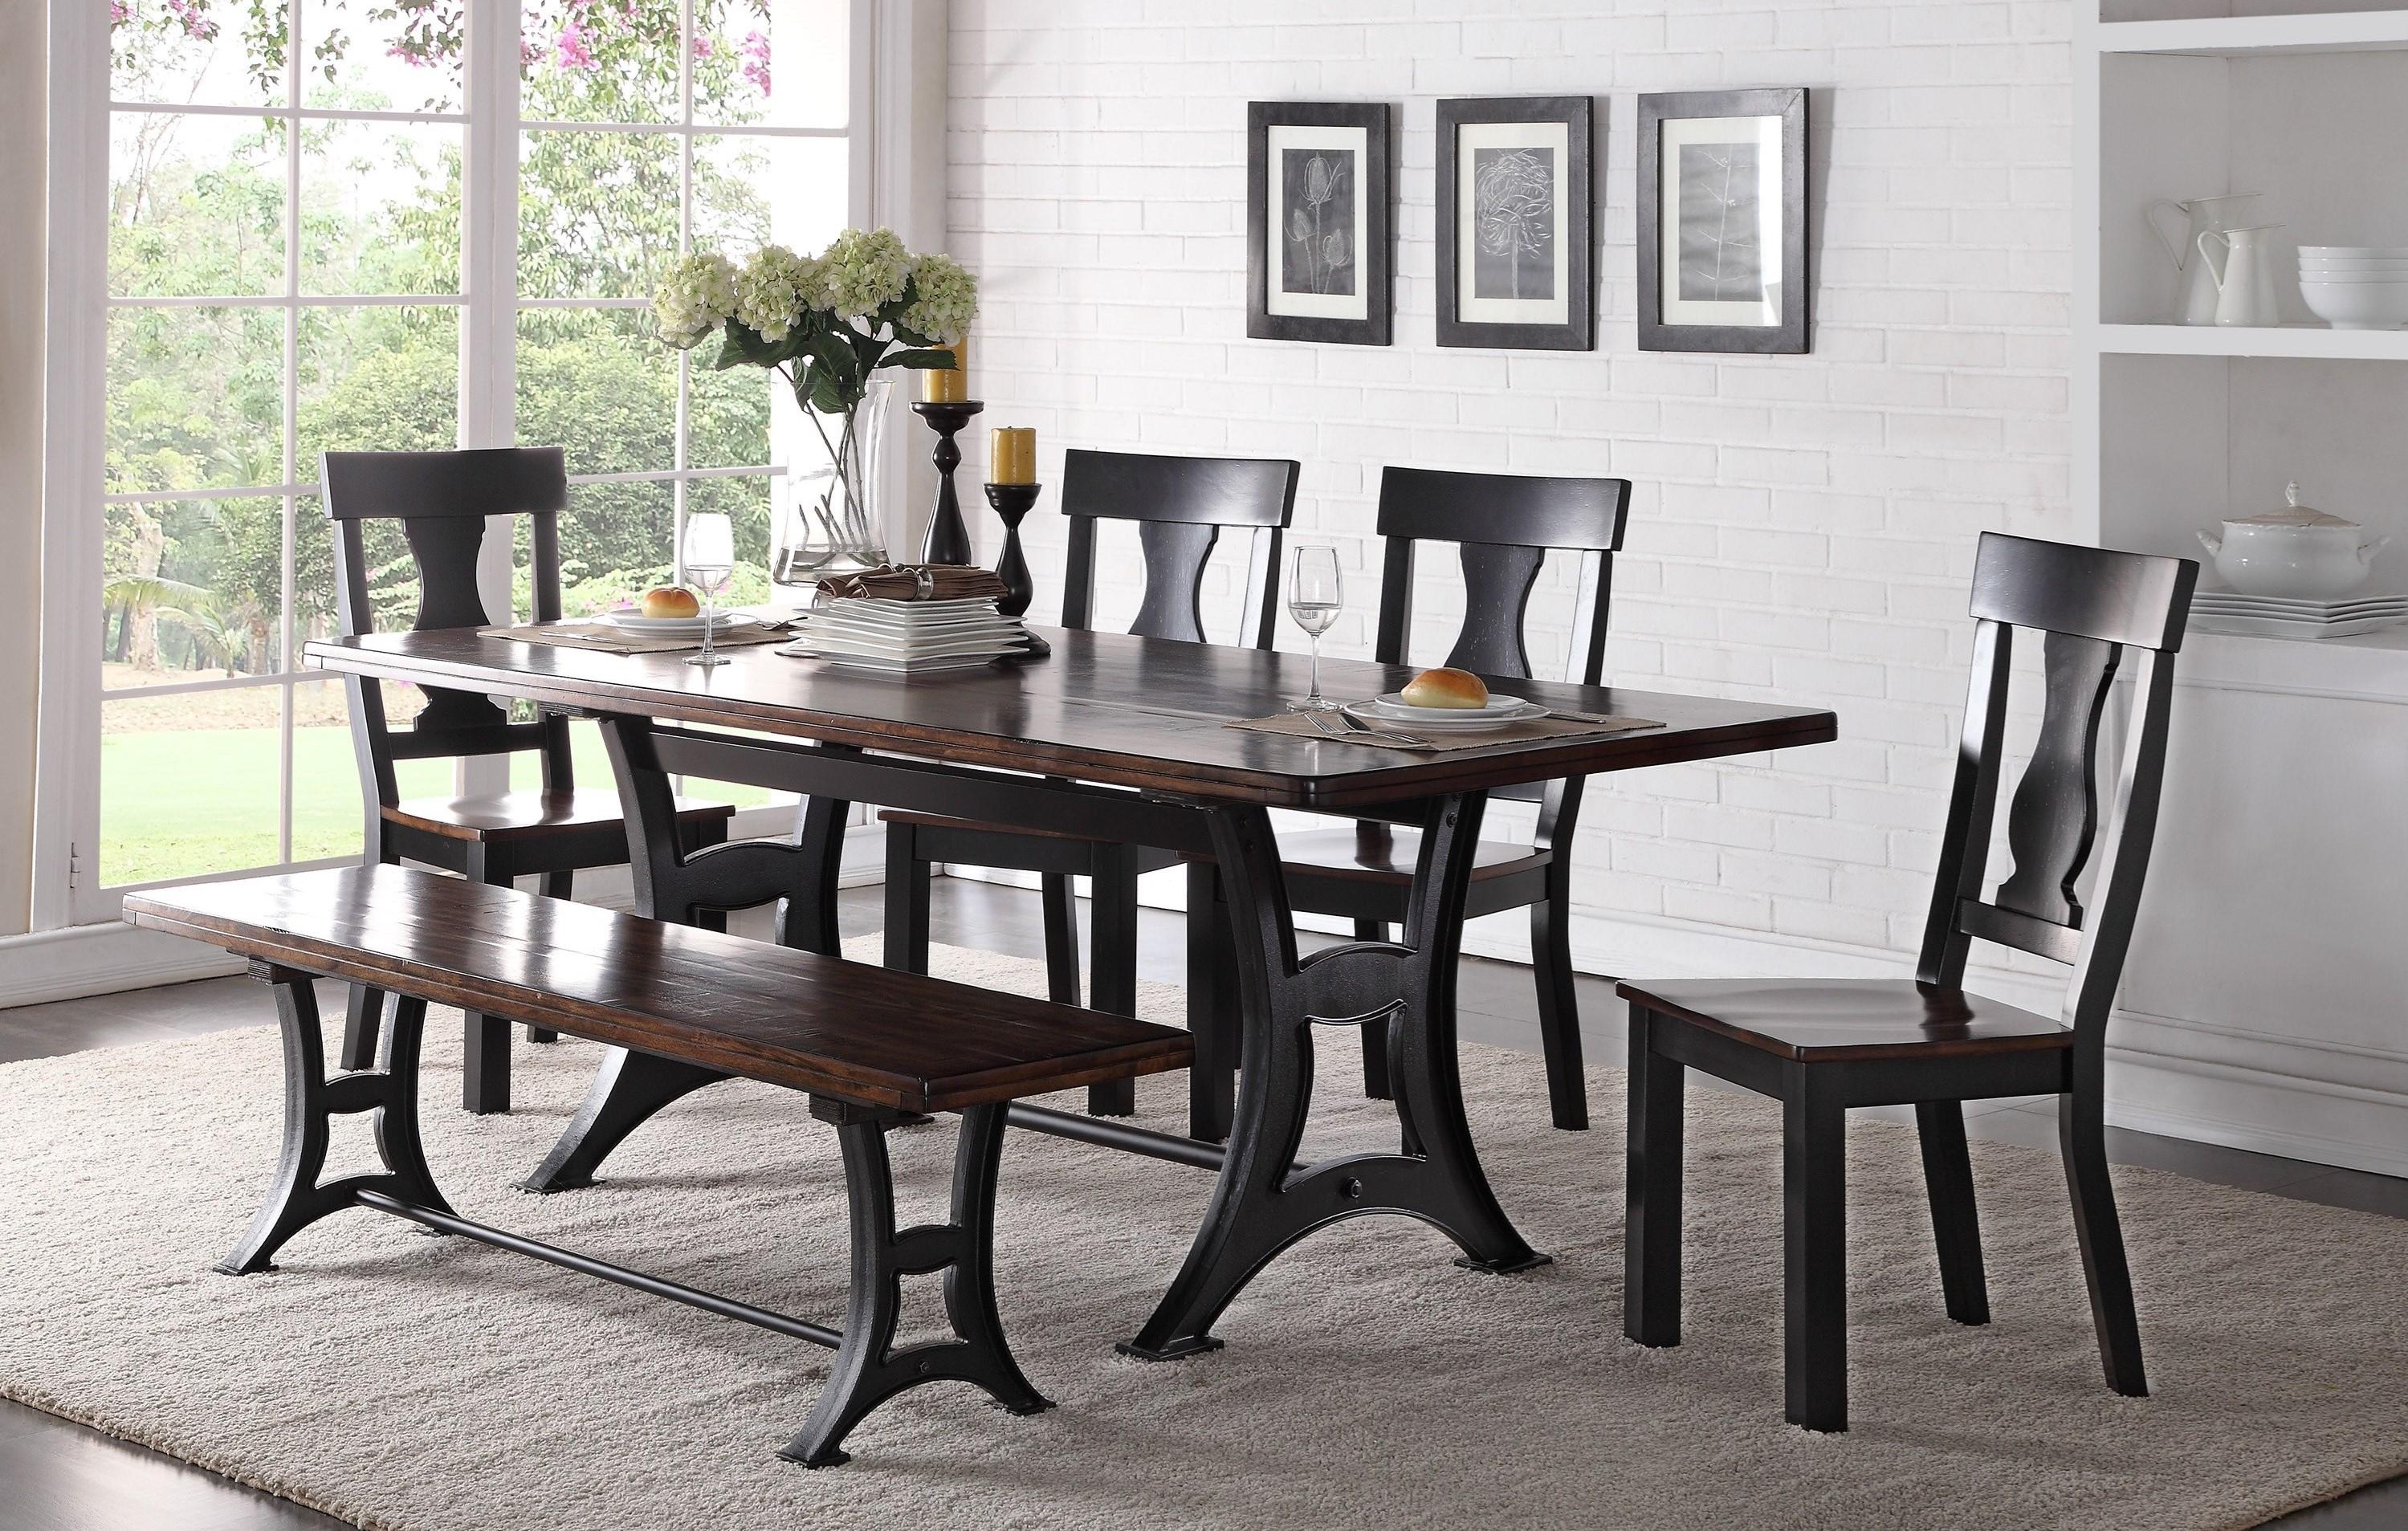 

    
Crown Mark D2105 Astor Victorian Rustic Finish Dining Set with Bench Set 6Pcs
